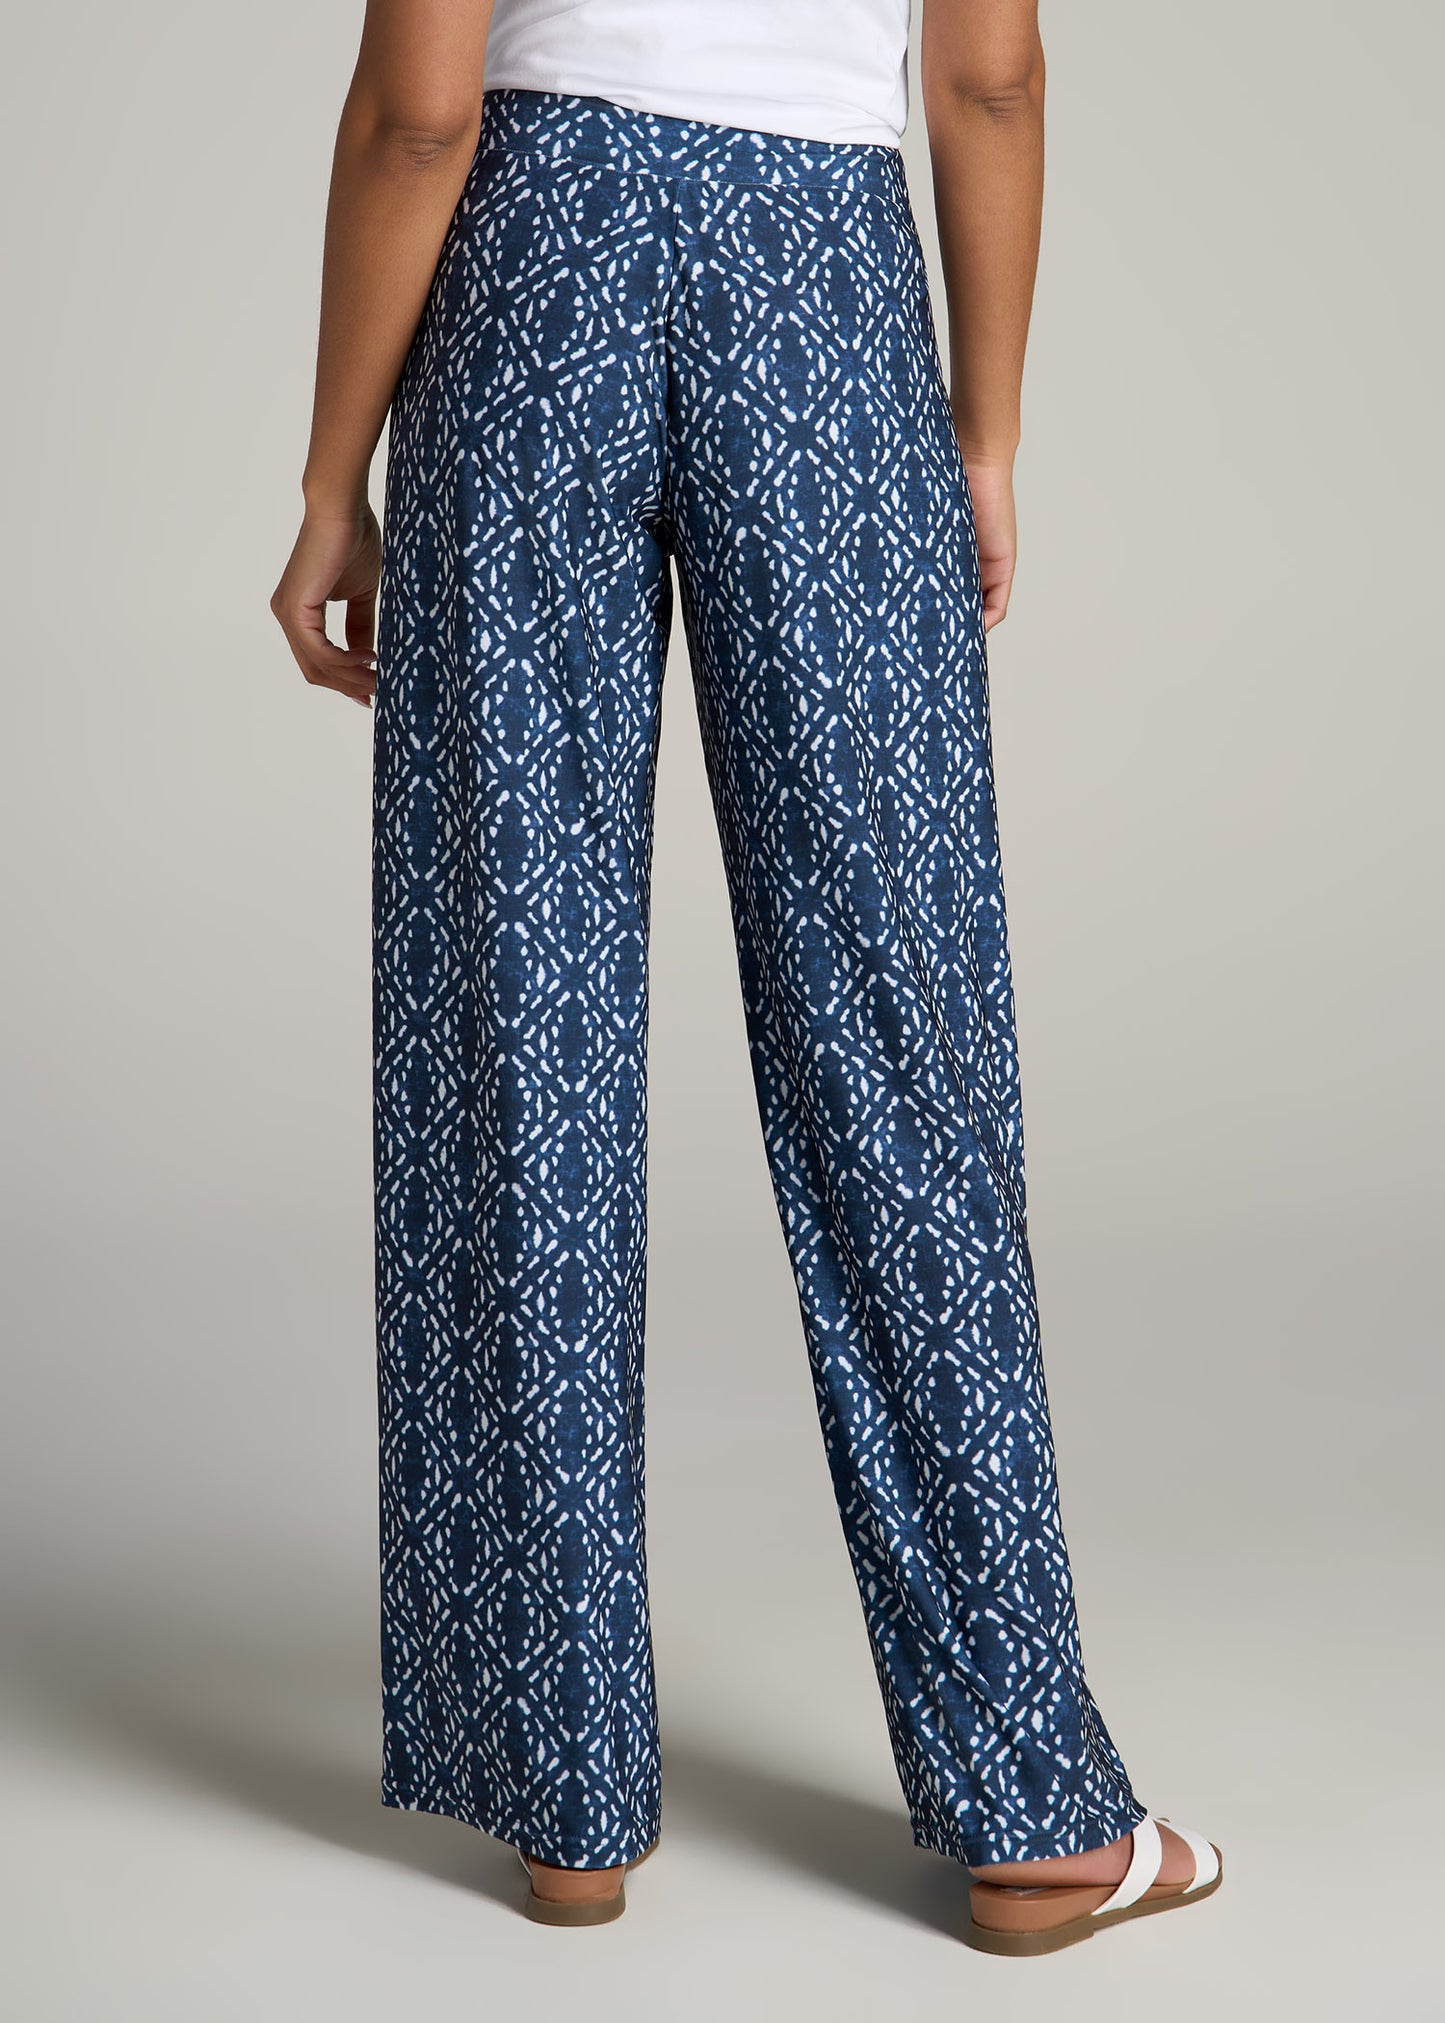 Front Fly Wide-Leg Pant, Tribal